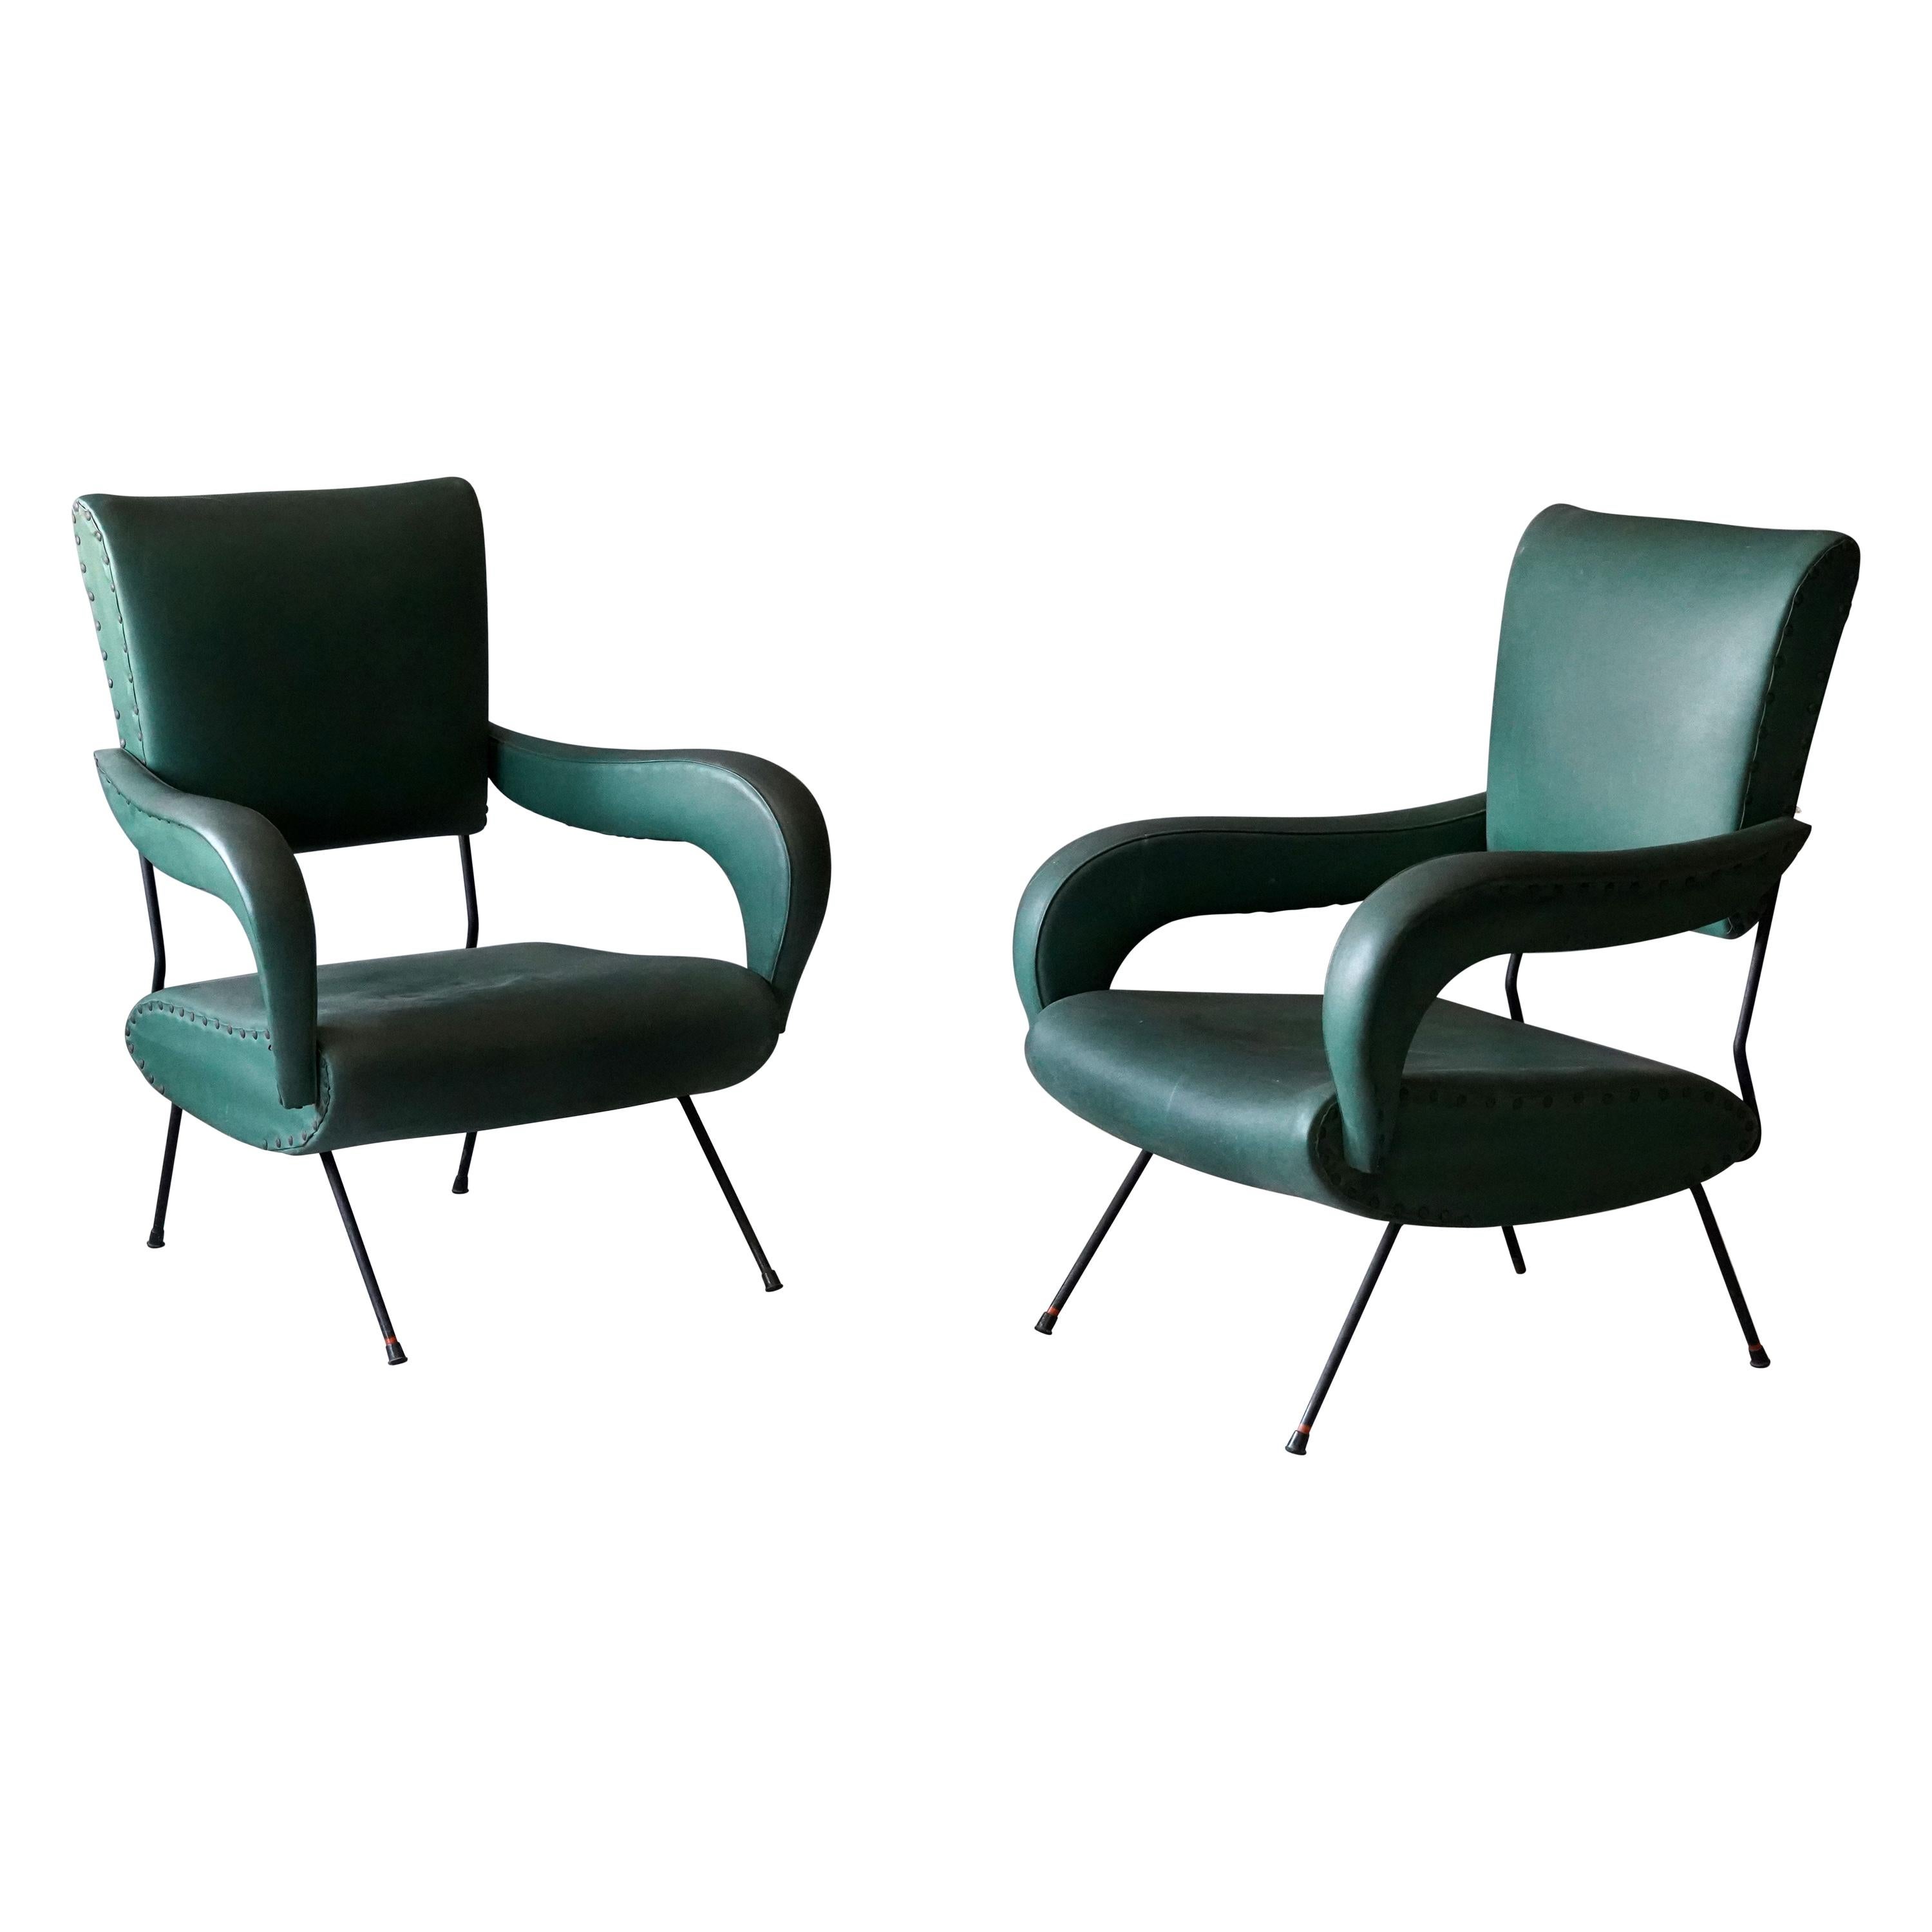 Italian Designer, Lounge Chairs, Lacquered Metal, Green-Dyed Vinyl, Italy, 1950s For Sale